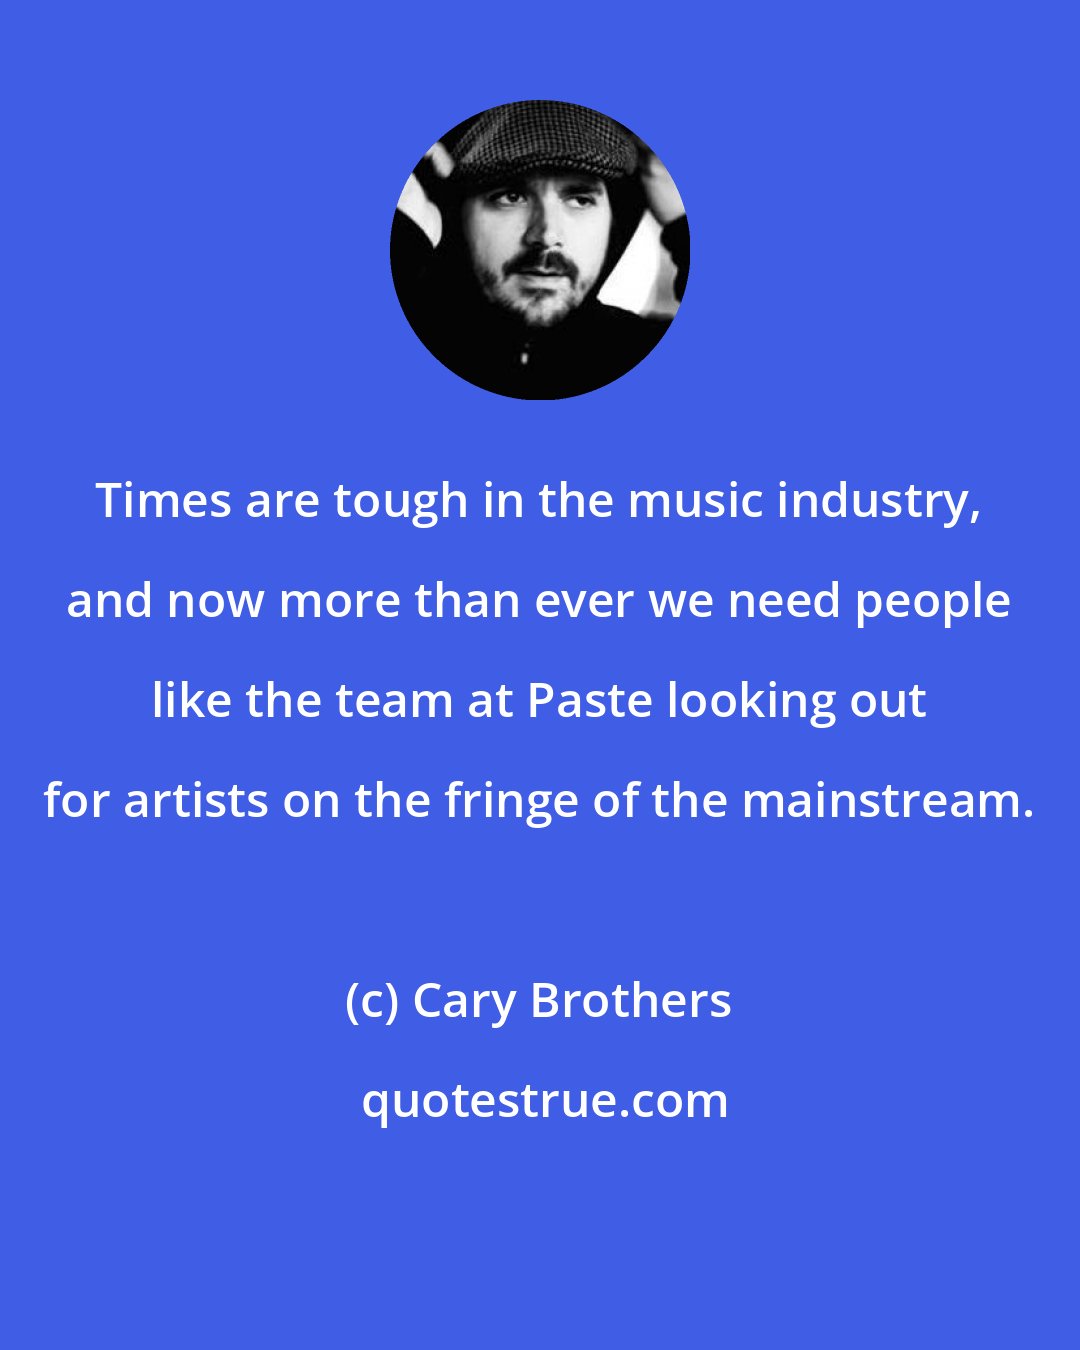 Cary Brothers: Times are tough in the music industry, and now more than ever we need people like the team at Paste looking out for artists on the fringe of the mainstream.